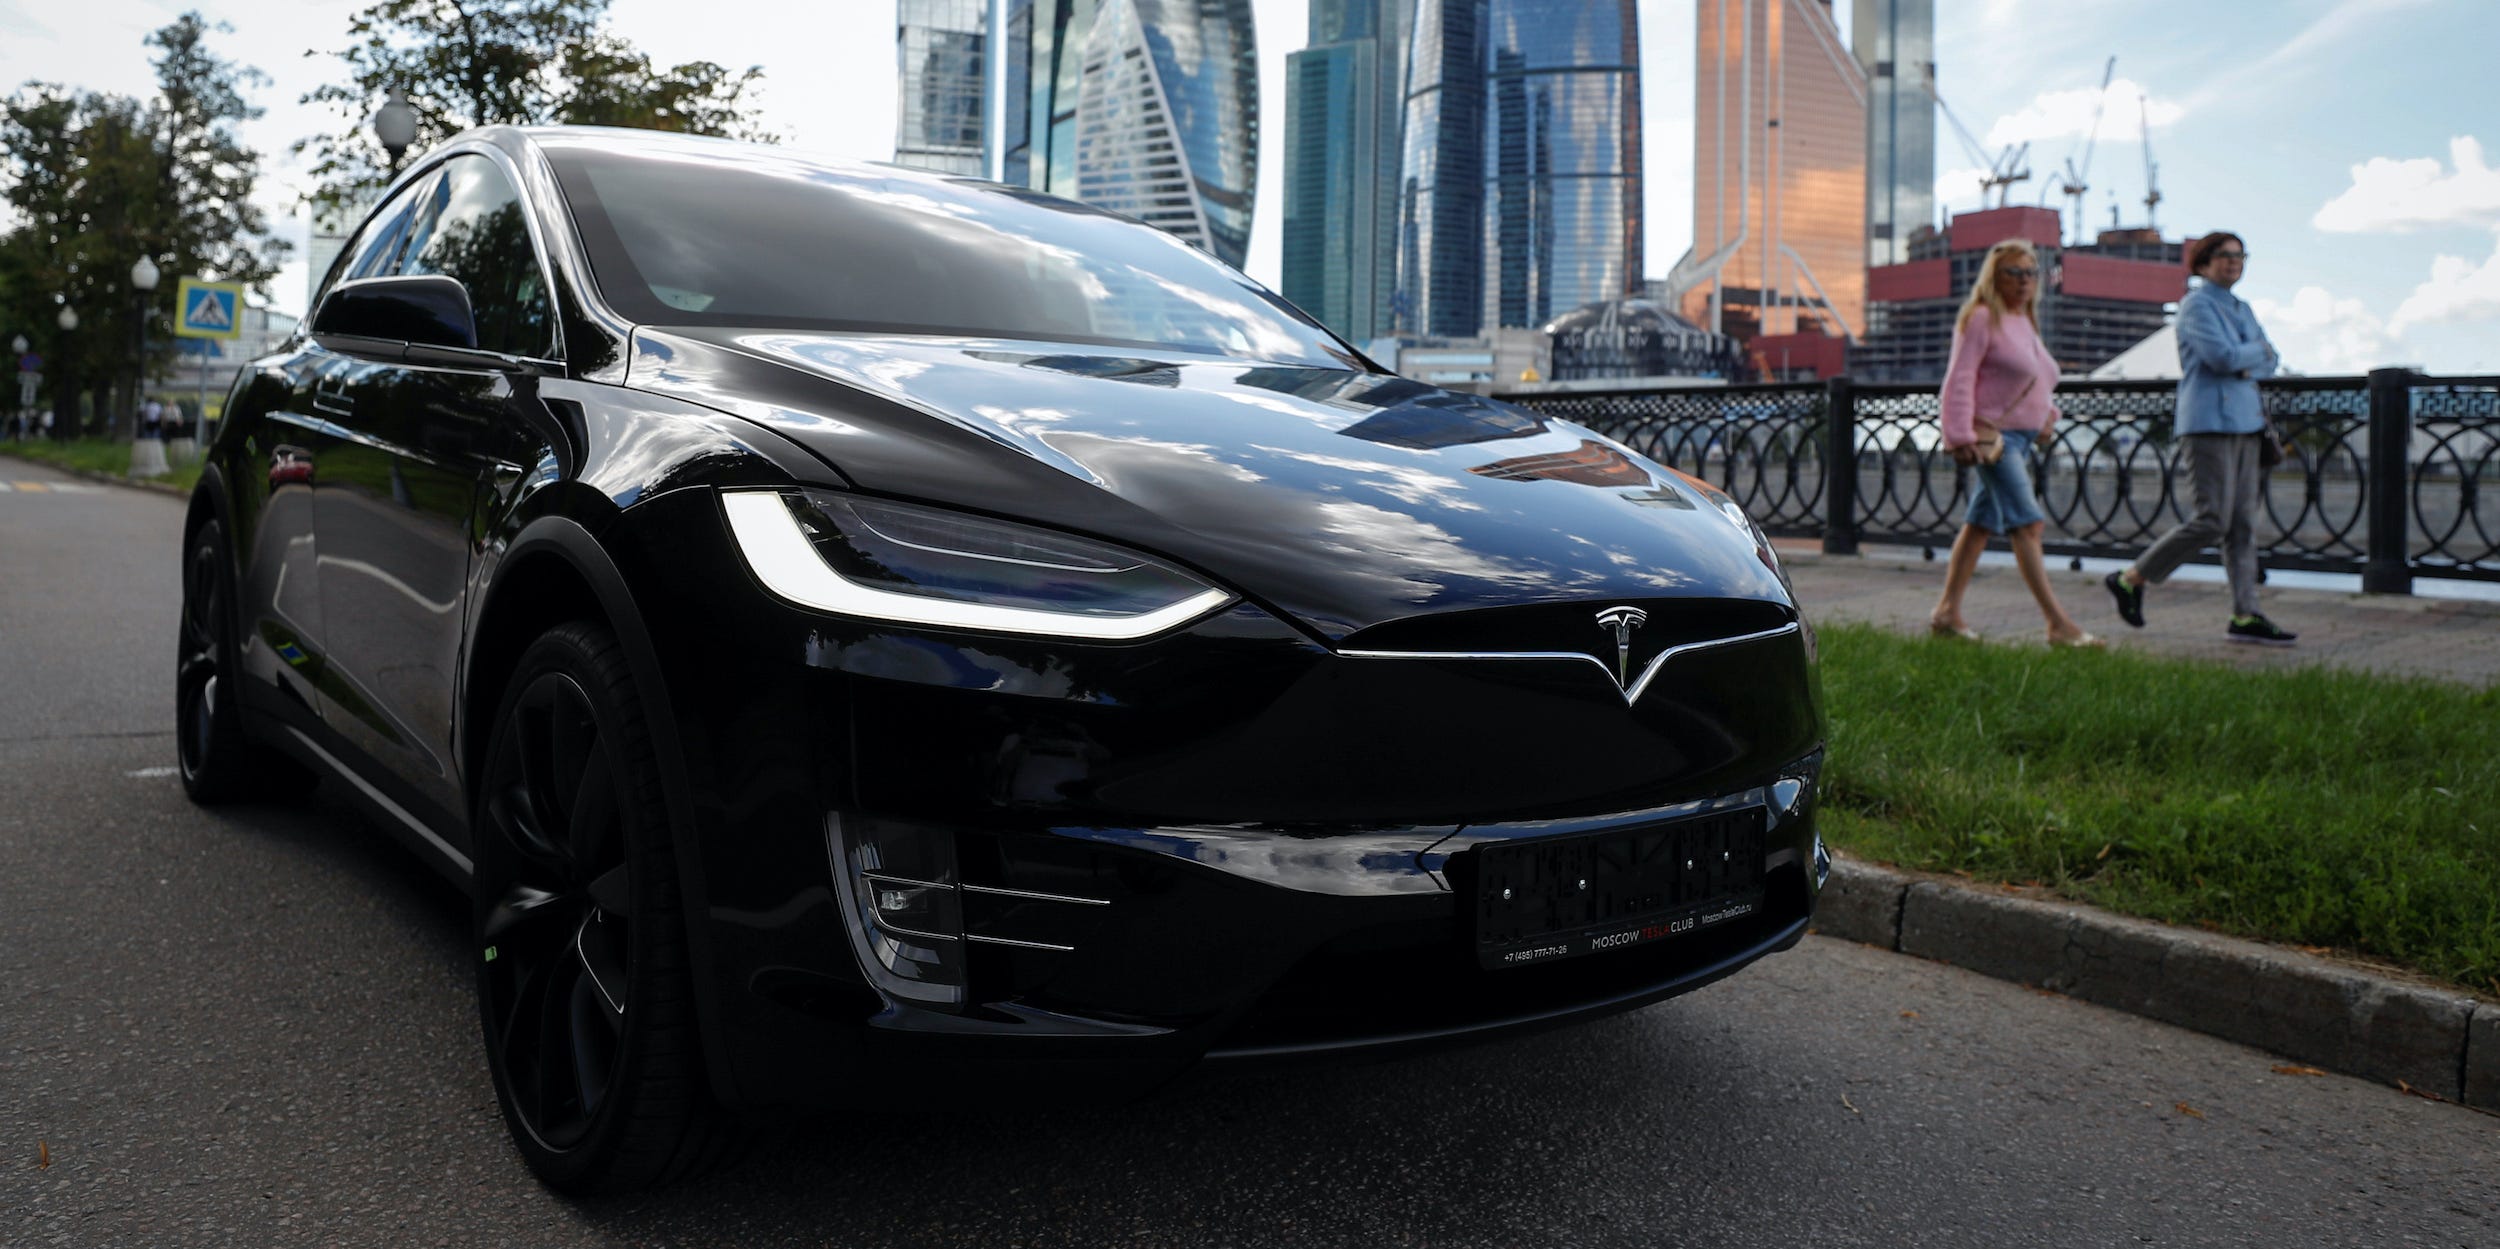 Tesla is recalling 134,000 Model X and Model S cars with faulty touchscreens following regulator pressure